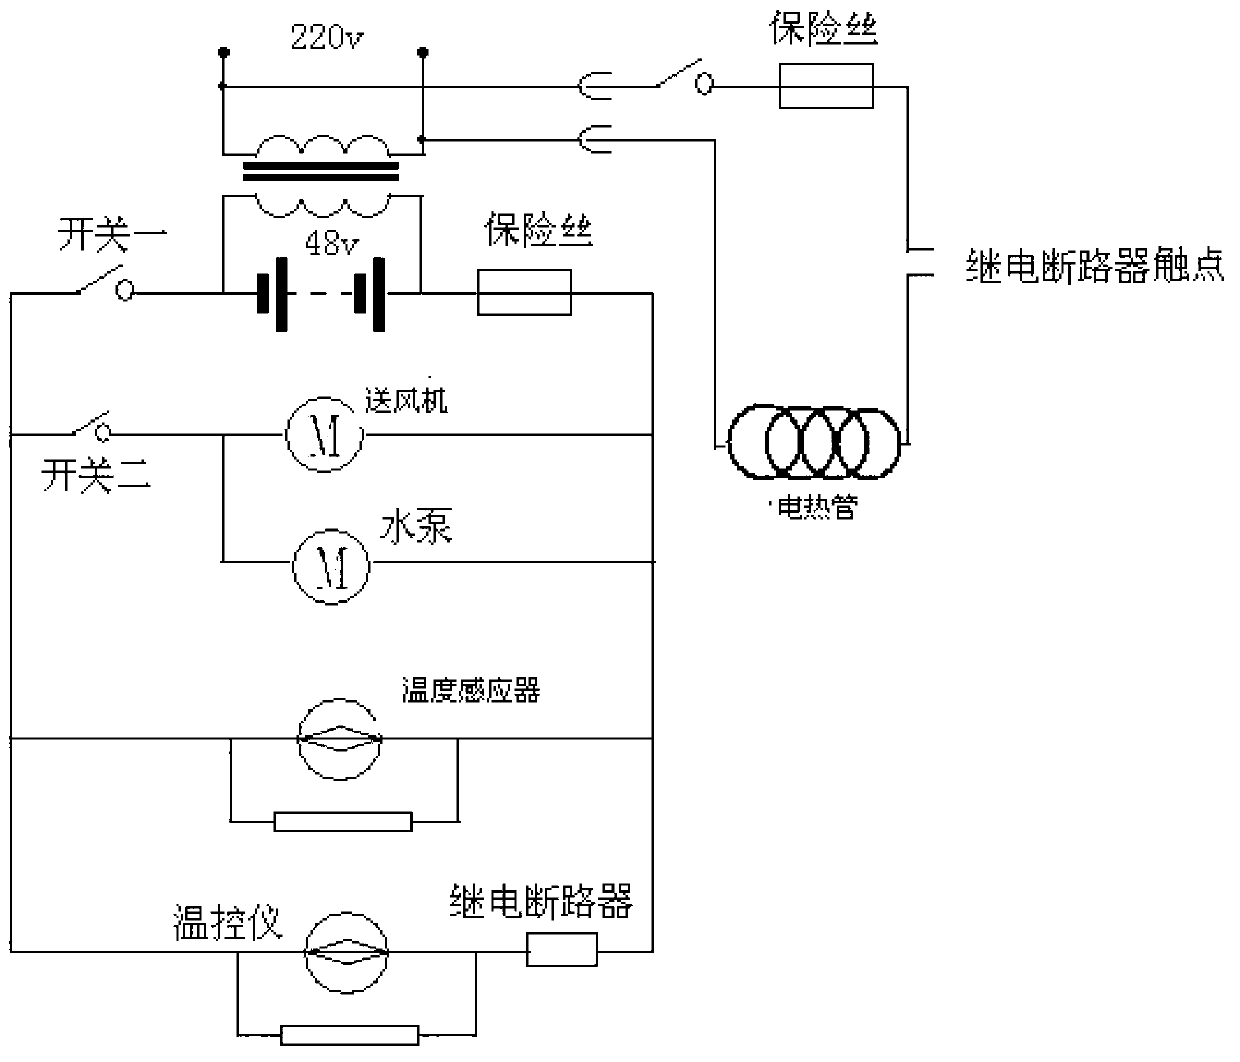 Control method of electric passenger car interior water-cooled air conditioner